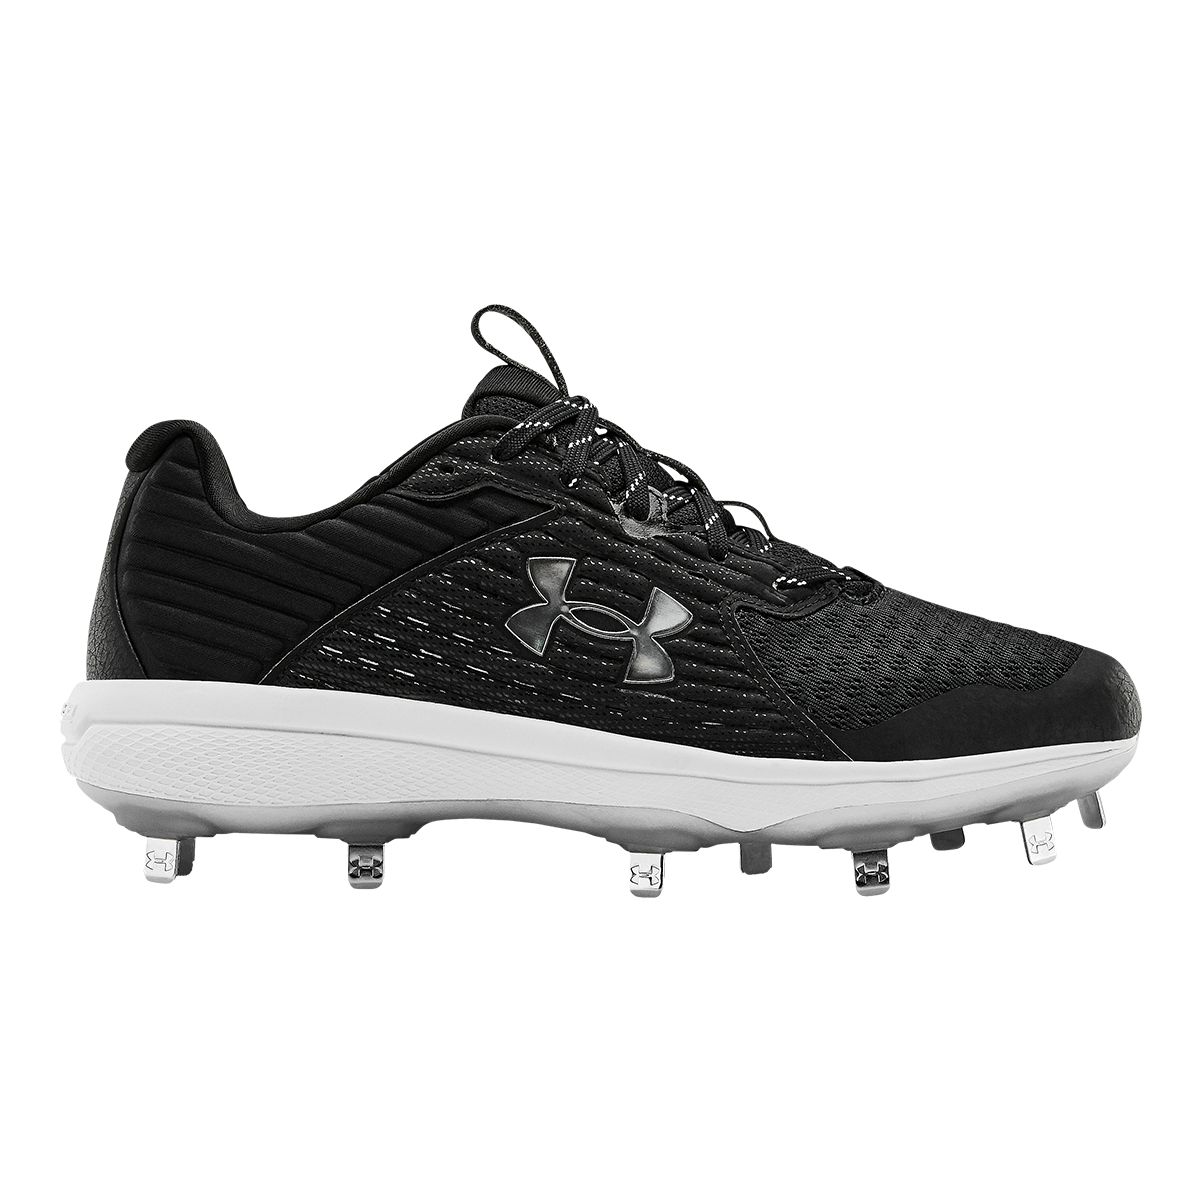 Image of Under Armour Men's Yard Metal Baseball Shoes/Cleats Low Top Softball